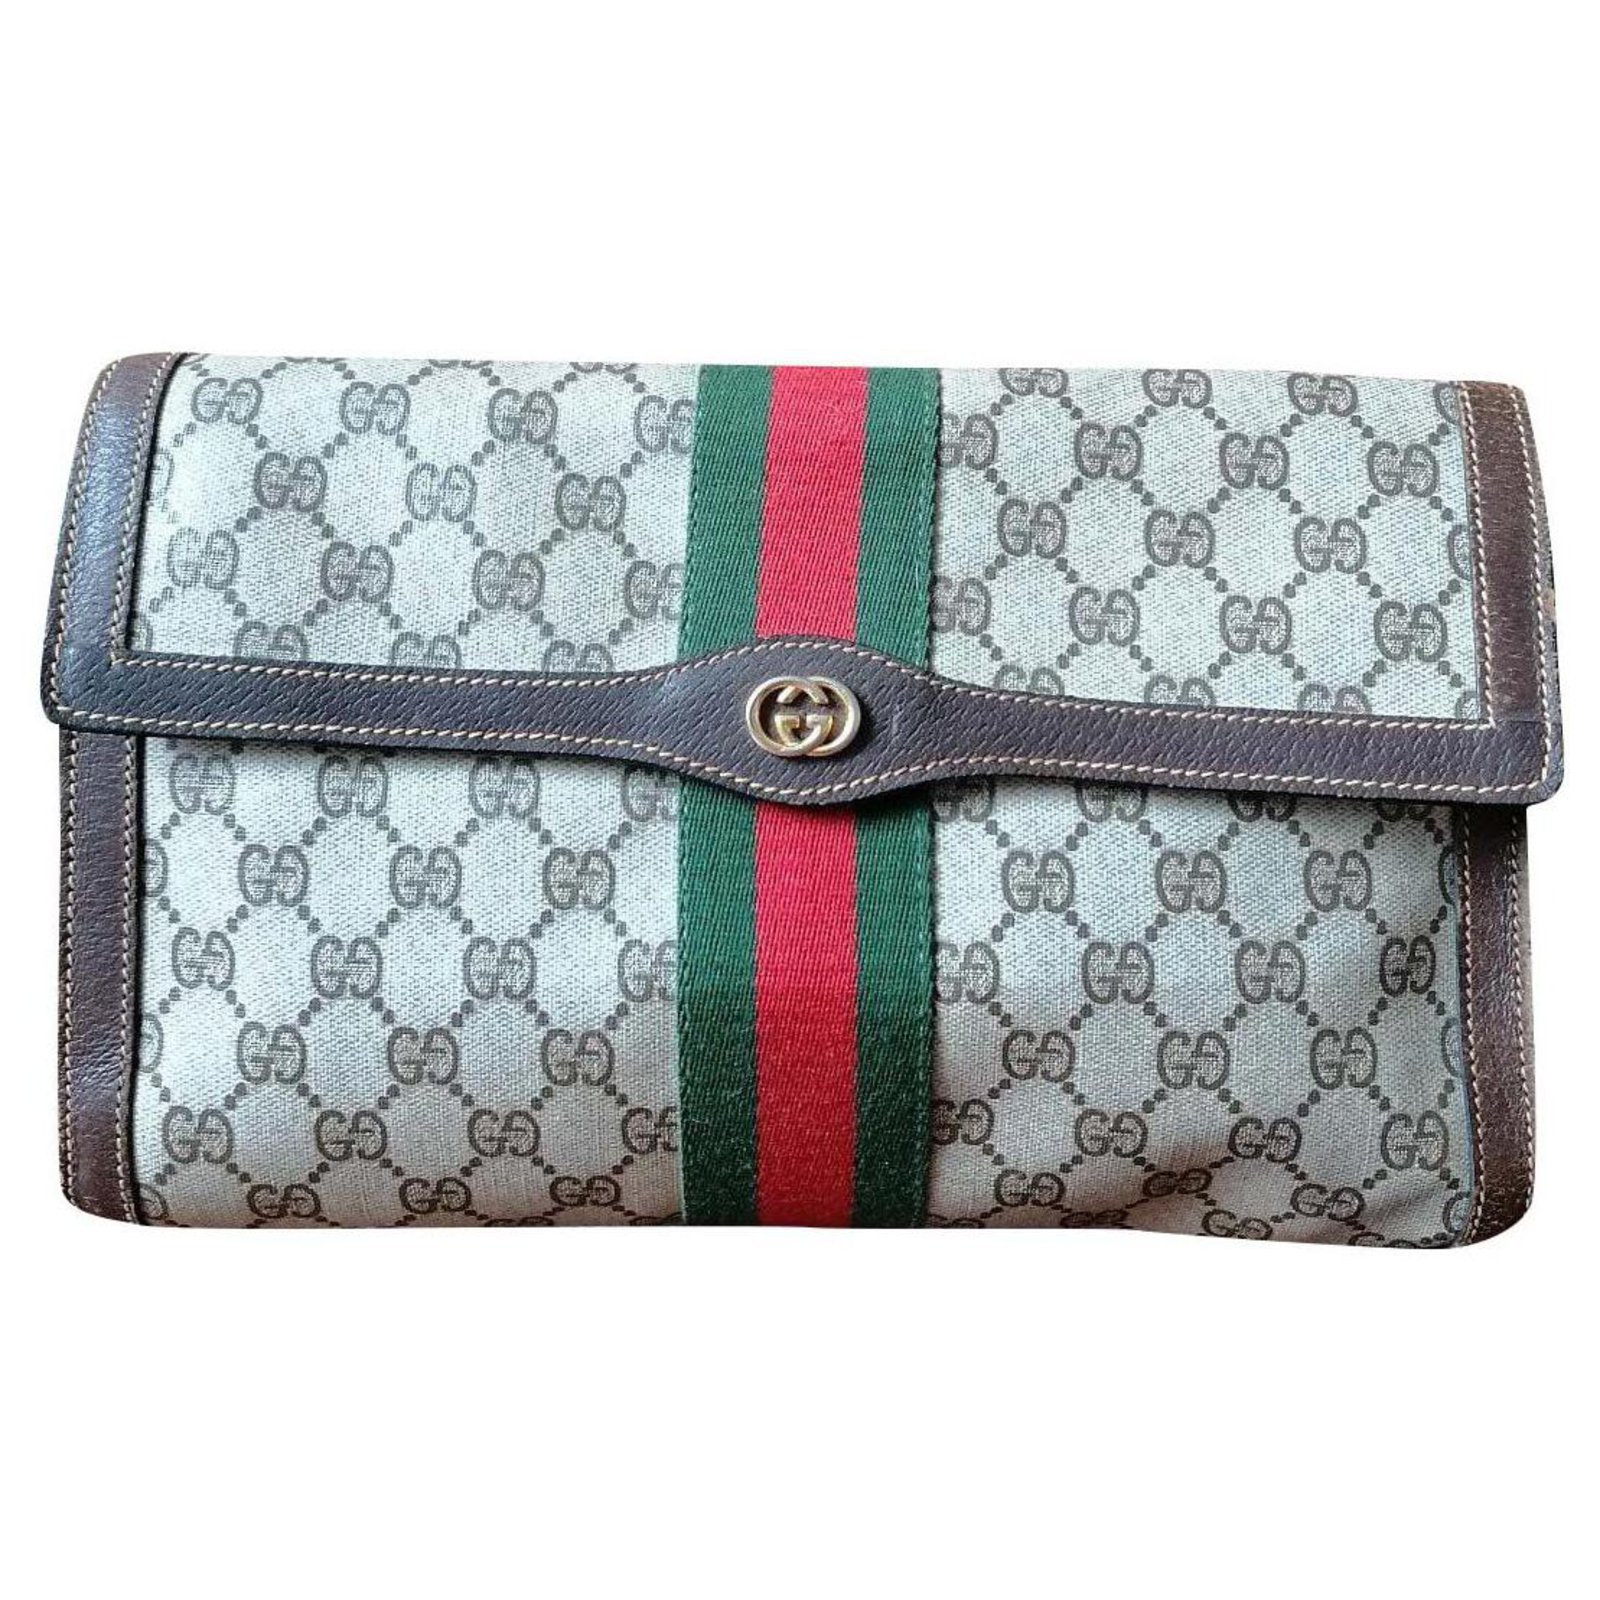 Gucci vintage ophidia Clutch bags 